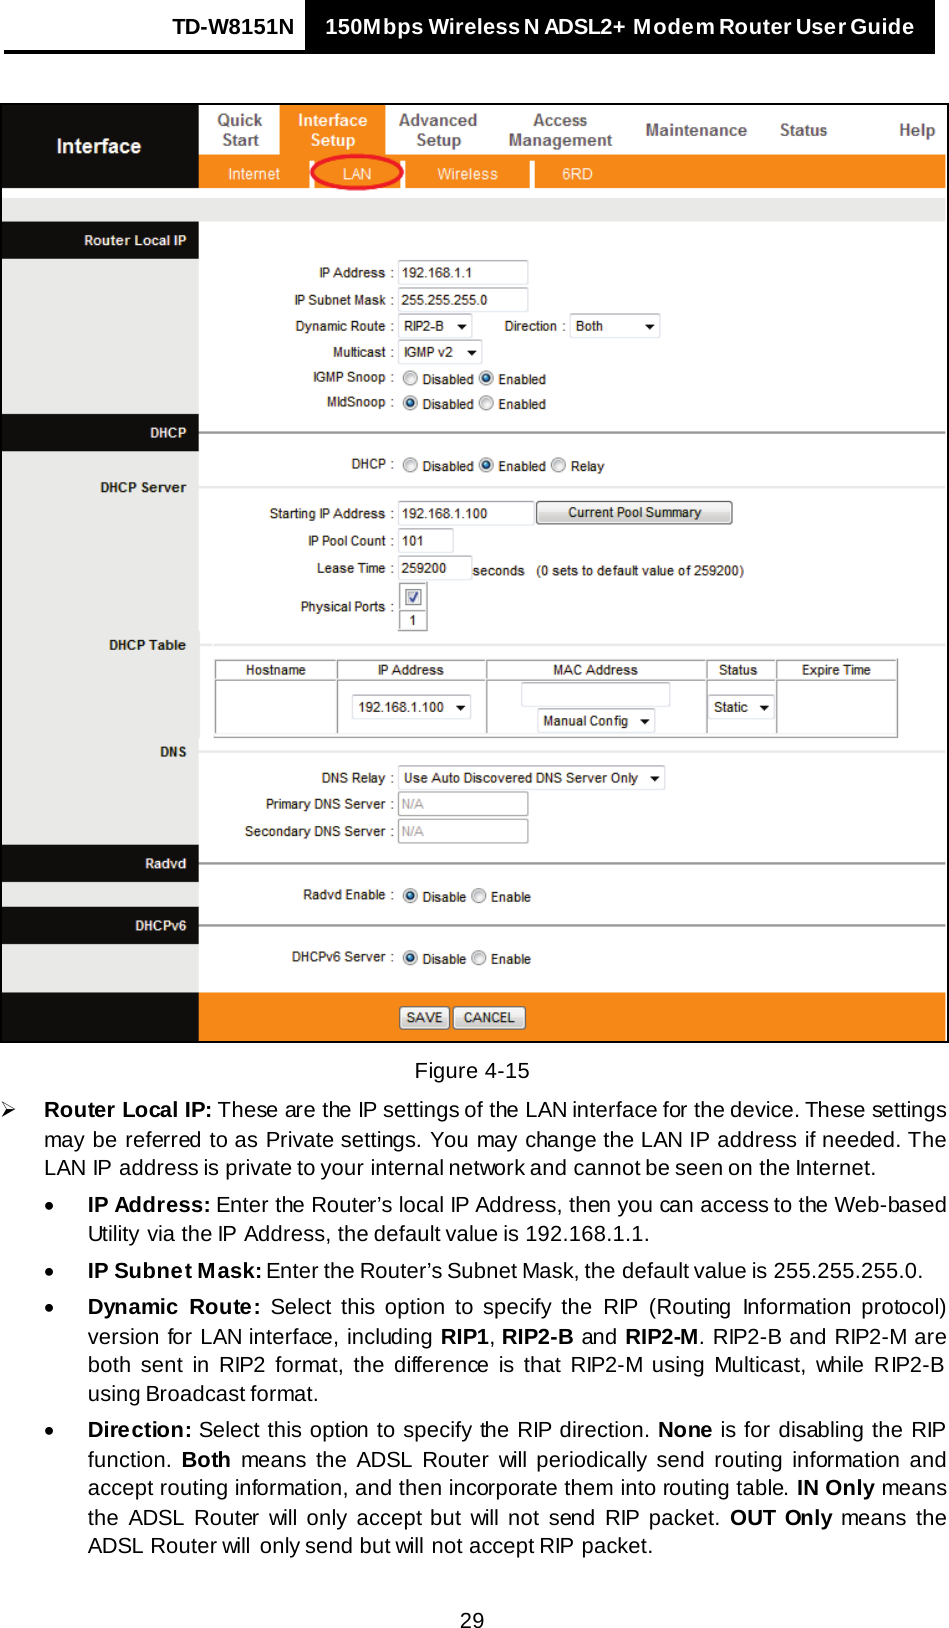 TD-W8151N 150Mbps Wireless N ADSL2+ Modem Router User Guide   29   Figure 4-15  Router Local IP: These are the IP settings of the LAN interface for the device. These settings may be referred to as Private settings. You may change the LAN IP address if needed. The LAN IP address is private to your internal network and cannot be seen on the Internet. • IP Address: Enter the Router’s local IP Address, then you can access to the Web-based Utility via the IP Address, the default value is 192.168.1.1. • IP Subnet Mask: Enter the Router’s Subnet Mask, the default value is 255.255.255.0. • Dynamic Route: Select this option to specify the RIP  (Routing Information protocol) version for LAN interface, including RIP1, RIP2-B and RIP2-M. RIP2-B and RIP2-M are both sent in RIP2 format, the difference is that RIP2-M using Multicast, while RIP2-B using Broadcast format. • Direction: Select this option to specify the RIP direction. None is for disabling the RIP function. Both means the ADSL Router will periodically send routing information and accept routing information, and then incorporate them into routing table. IN Only means the ADSL Router will only accept but will not send RIP packet. OUT  Only means the ADSL Router will  only send but will  not accept RIP packet. 